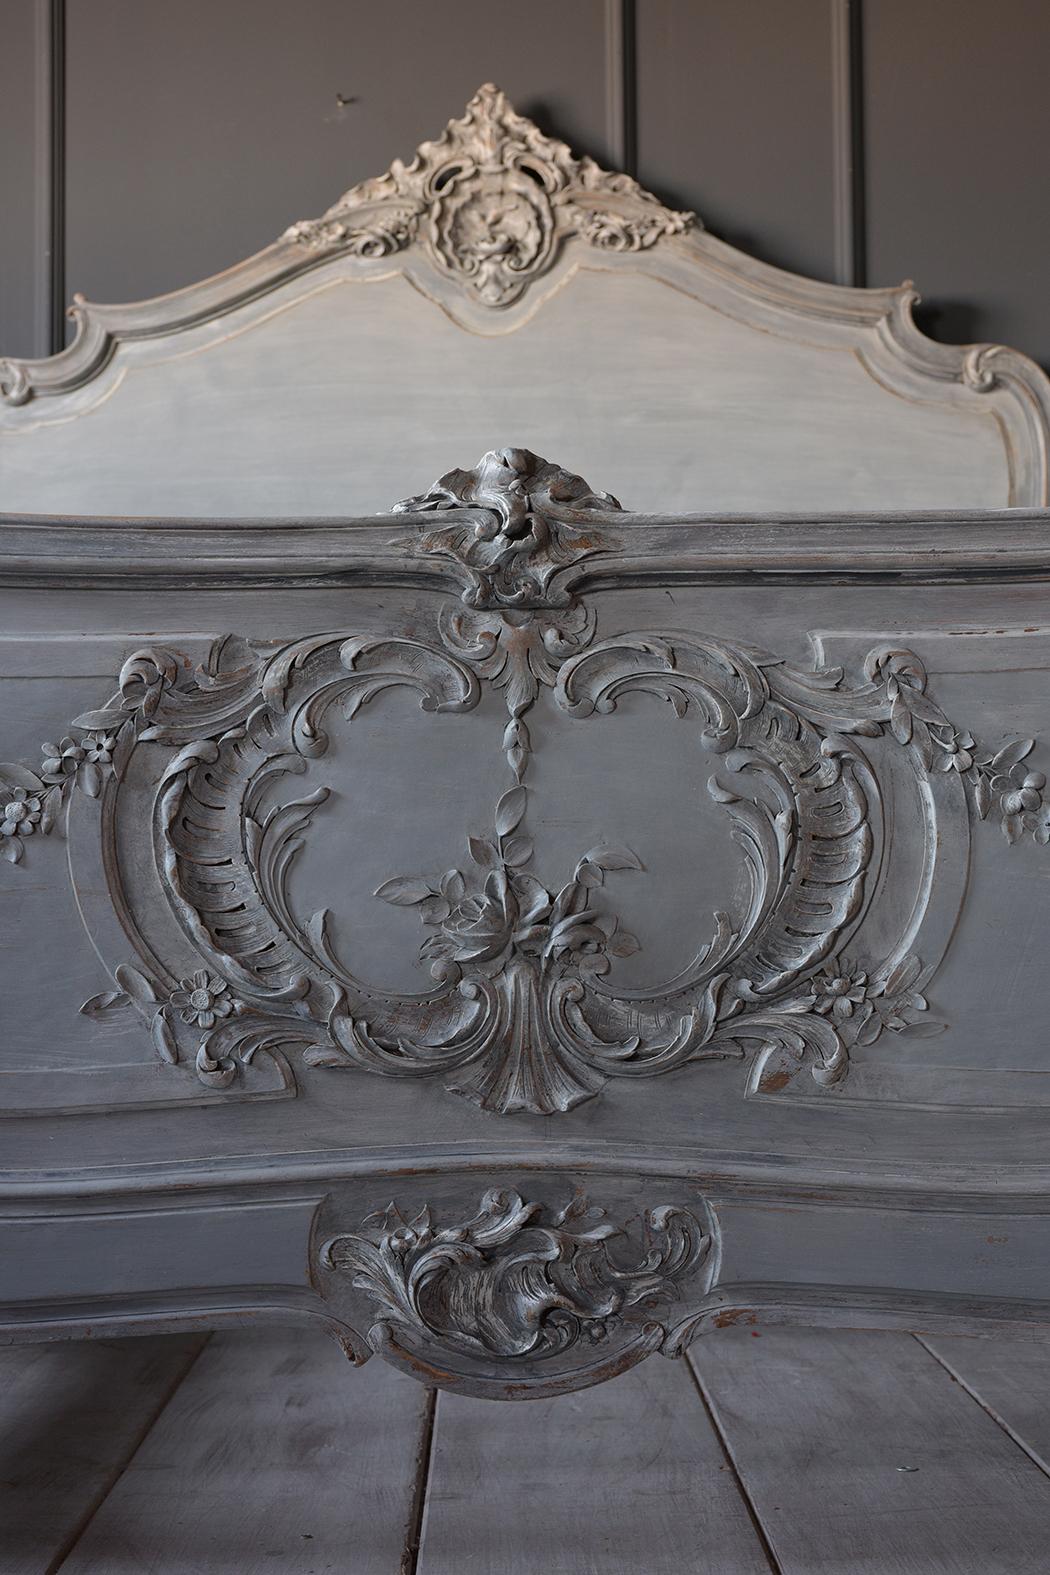 This French 19th century Louis XV style bed frame fits a full-size mattress. It has a solid wood frame that is painted a pale light blue, and grey with a distressed finish. It has carved details on the headboard, footboard, and wooden rails. The